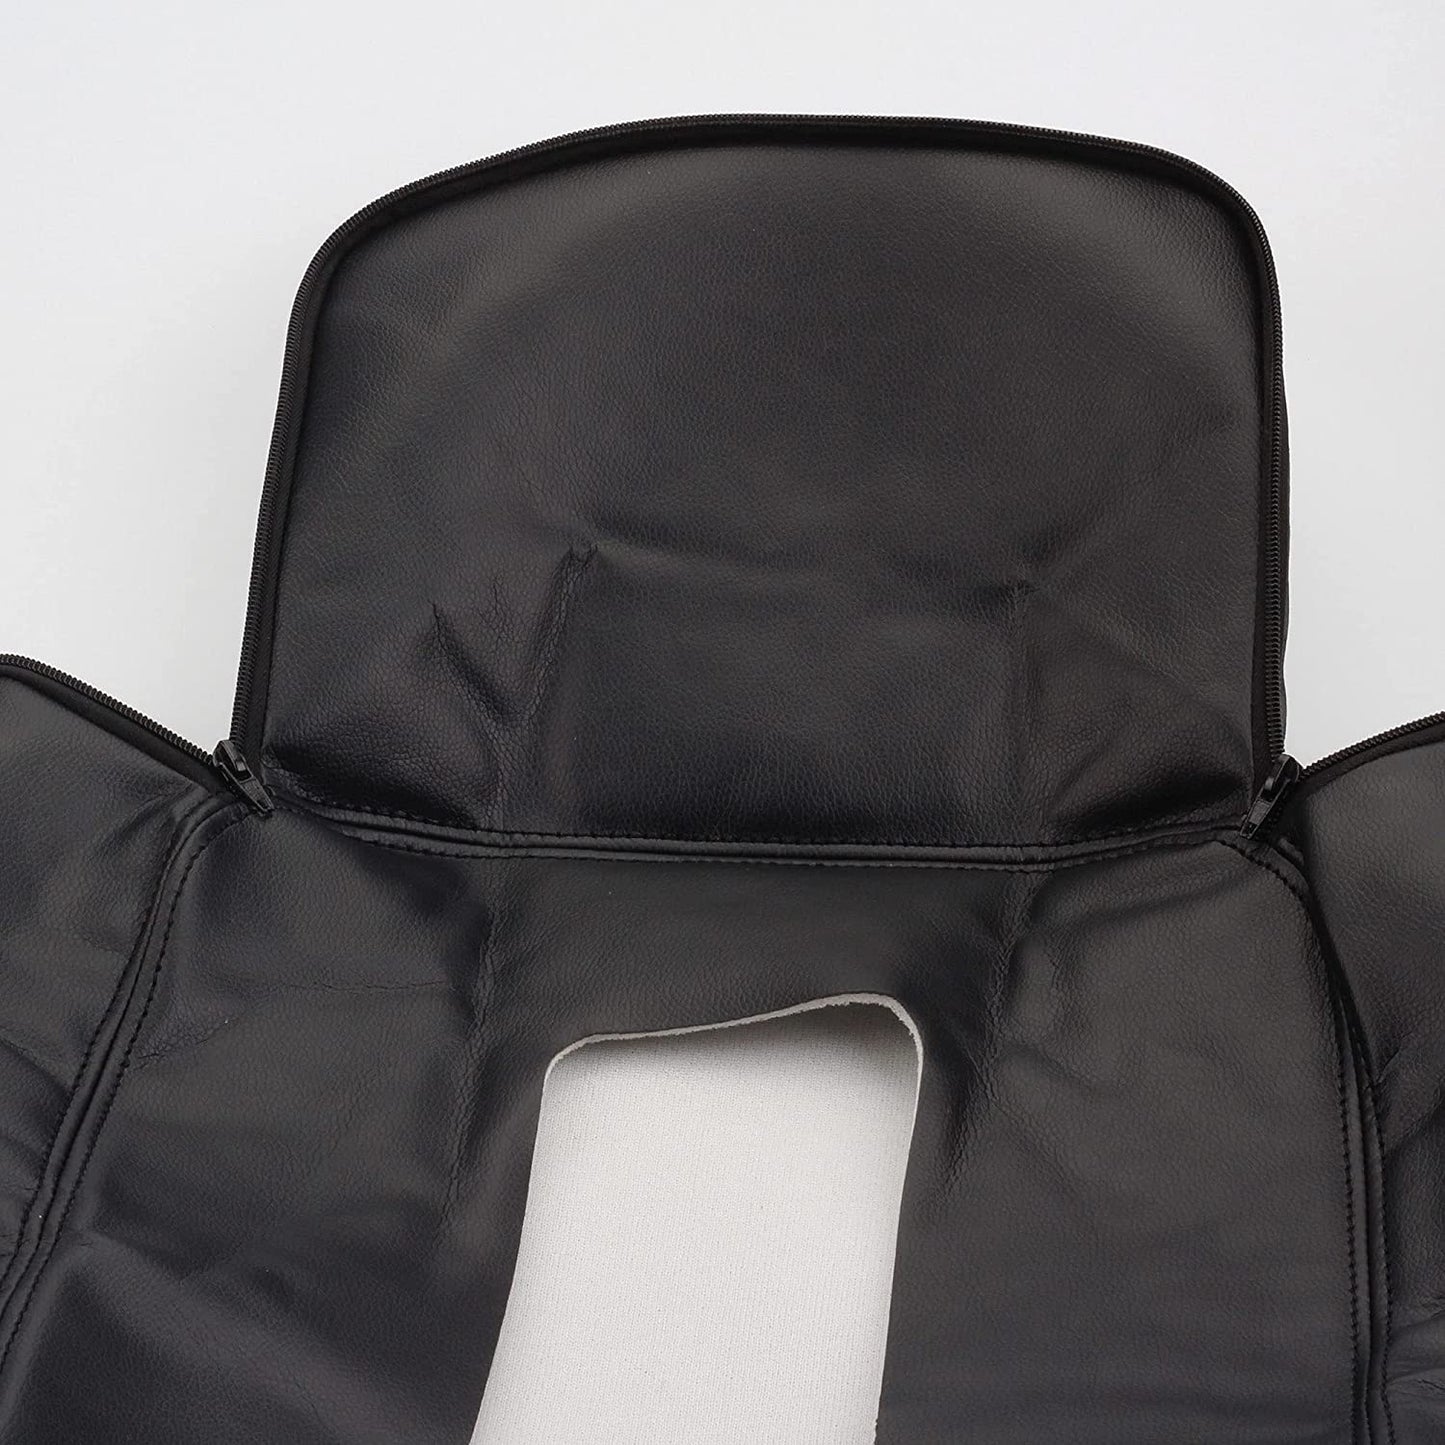 07-13 Chevy GMC Jump Seat Armrest Cover with Zipper Design Center Console Cover (Black)